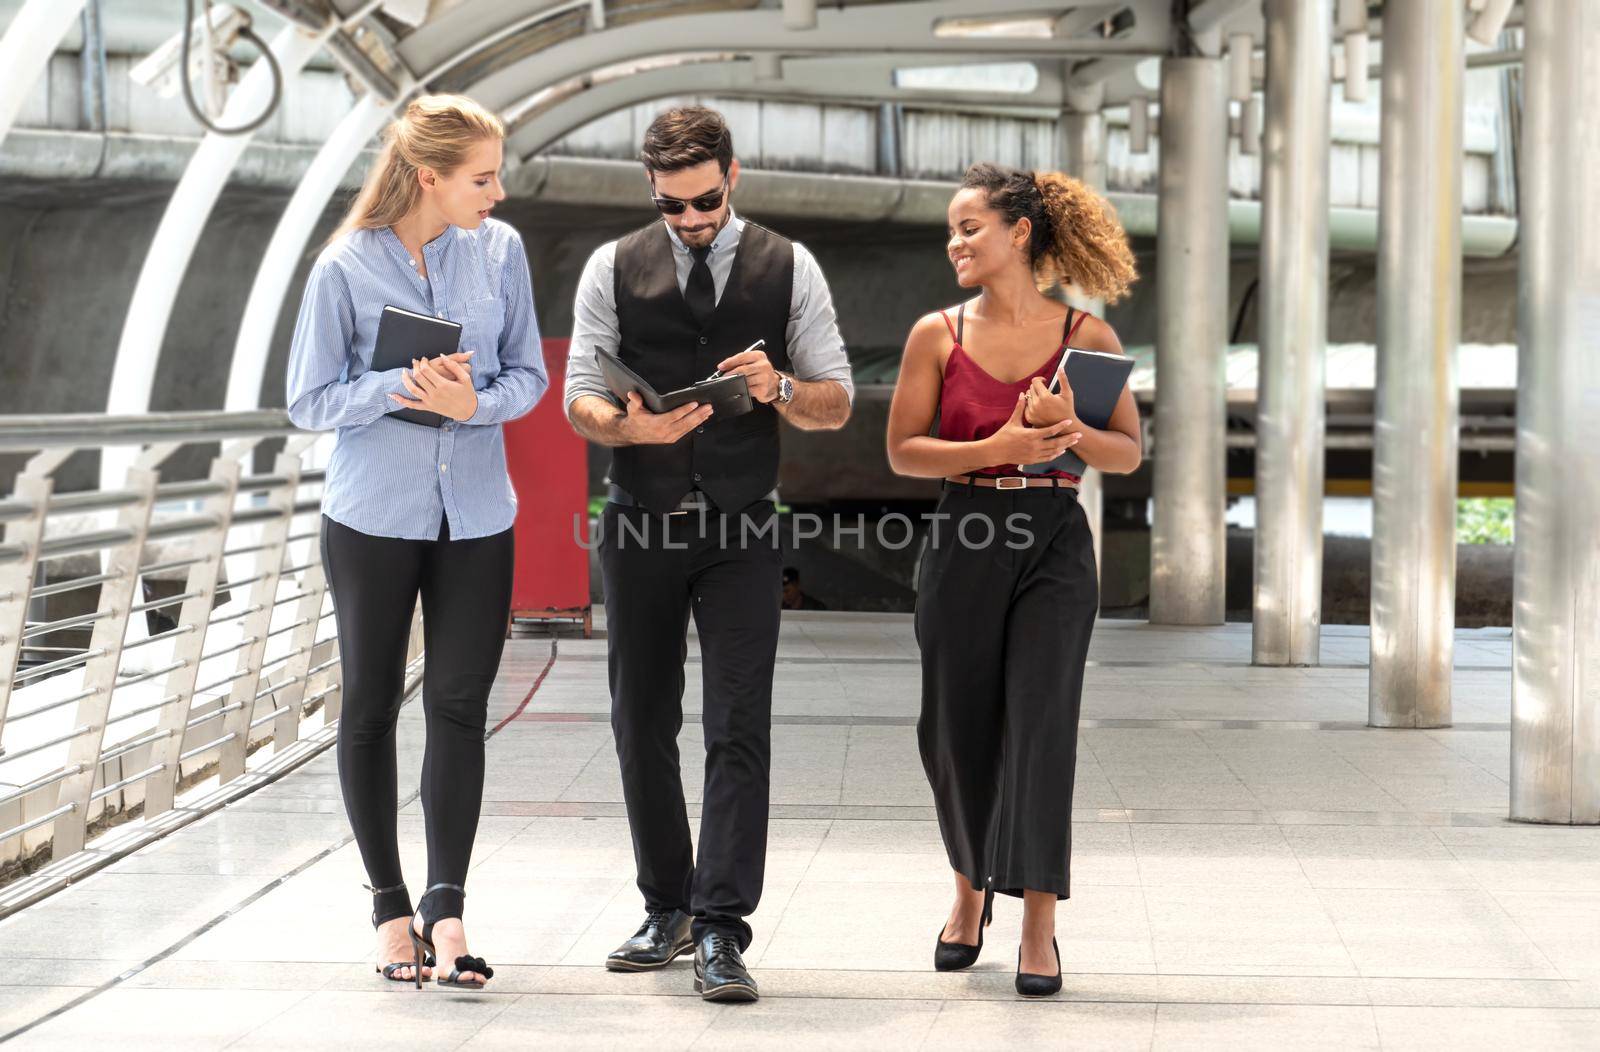 Candid Portraits of business people discussing while walking on walkway.